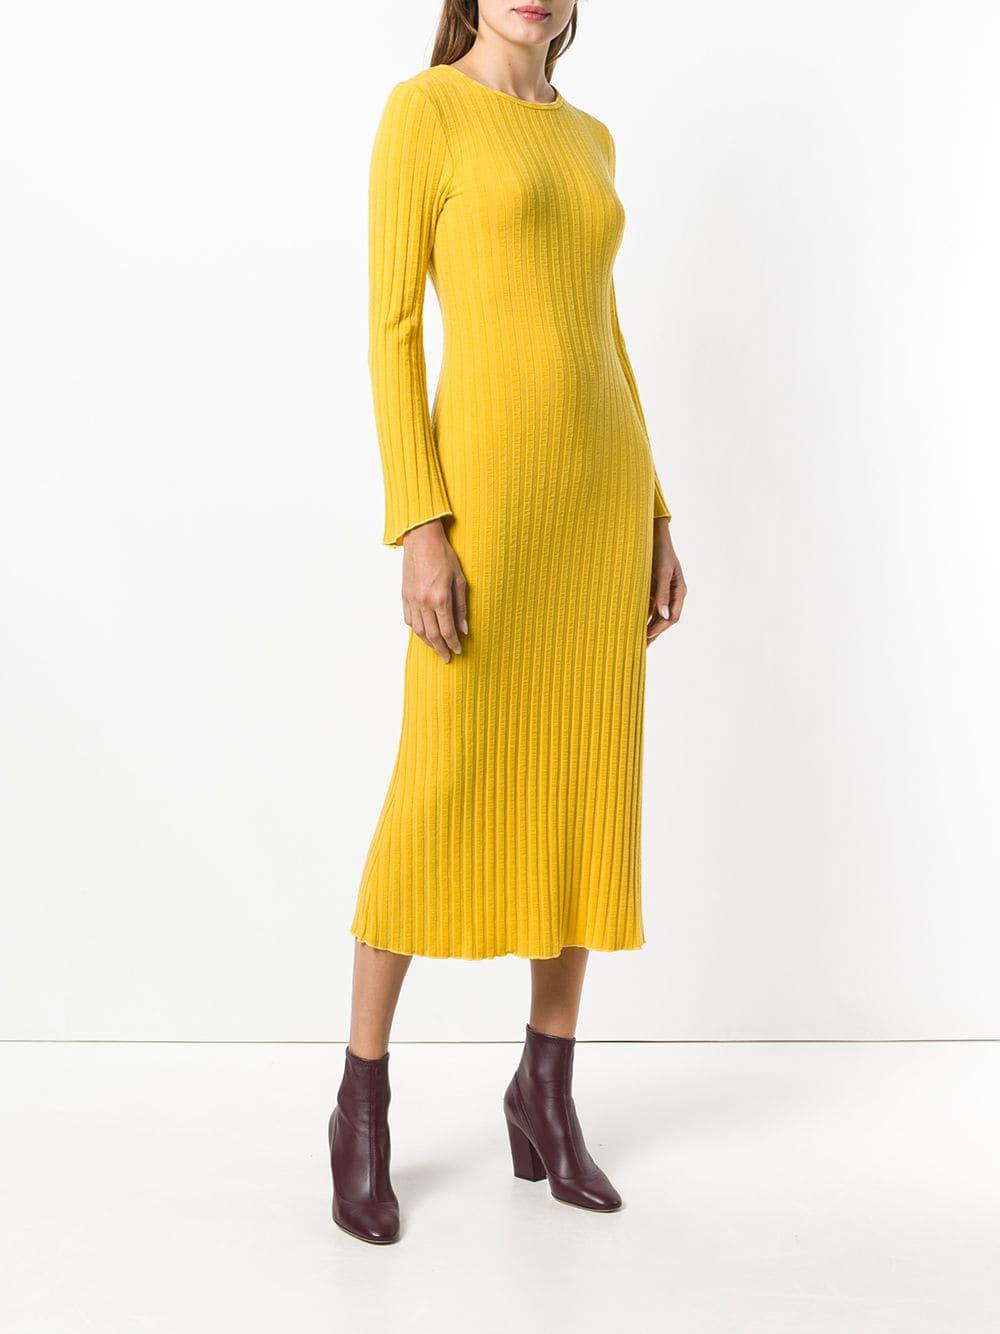 Lyst - Simon Miller Ribbed Knit Dress in Yellow